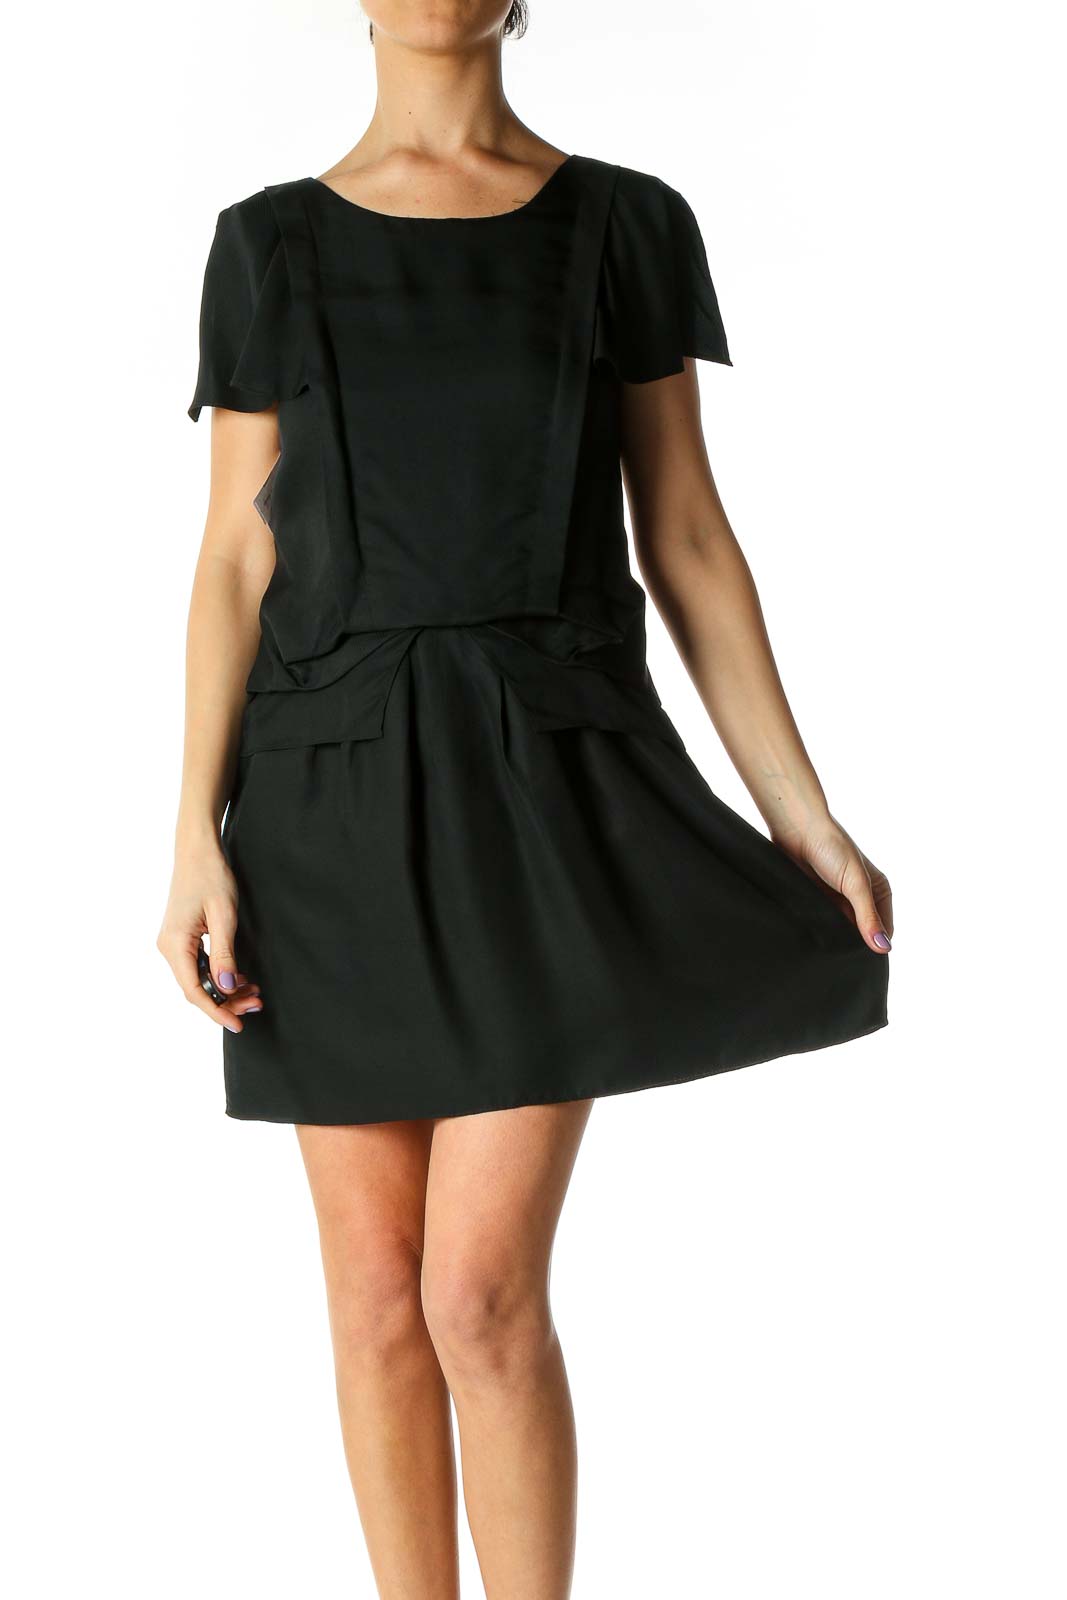 Black Solid Casual A-Line Dress Front